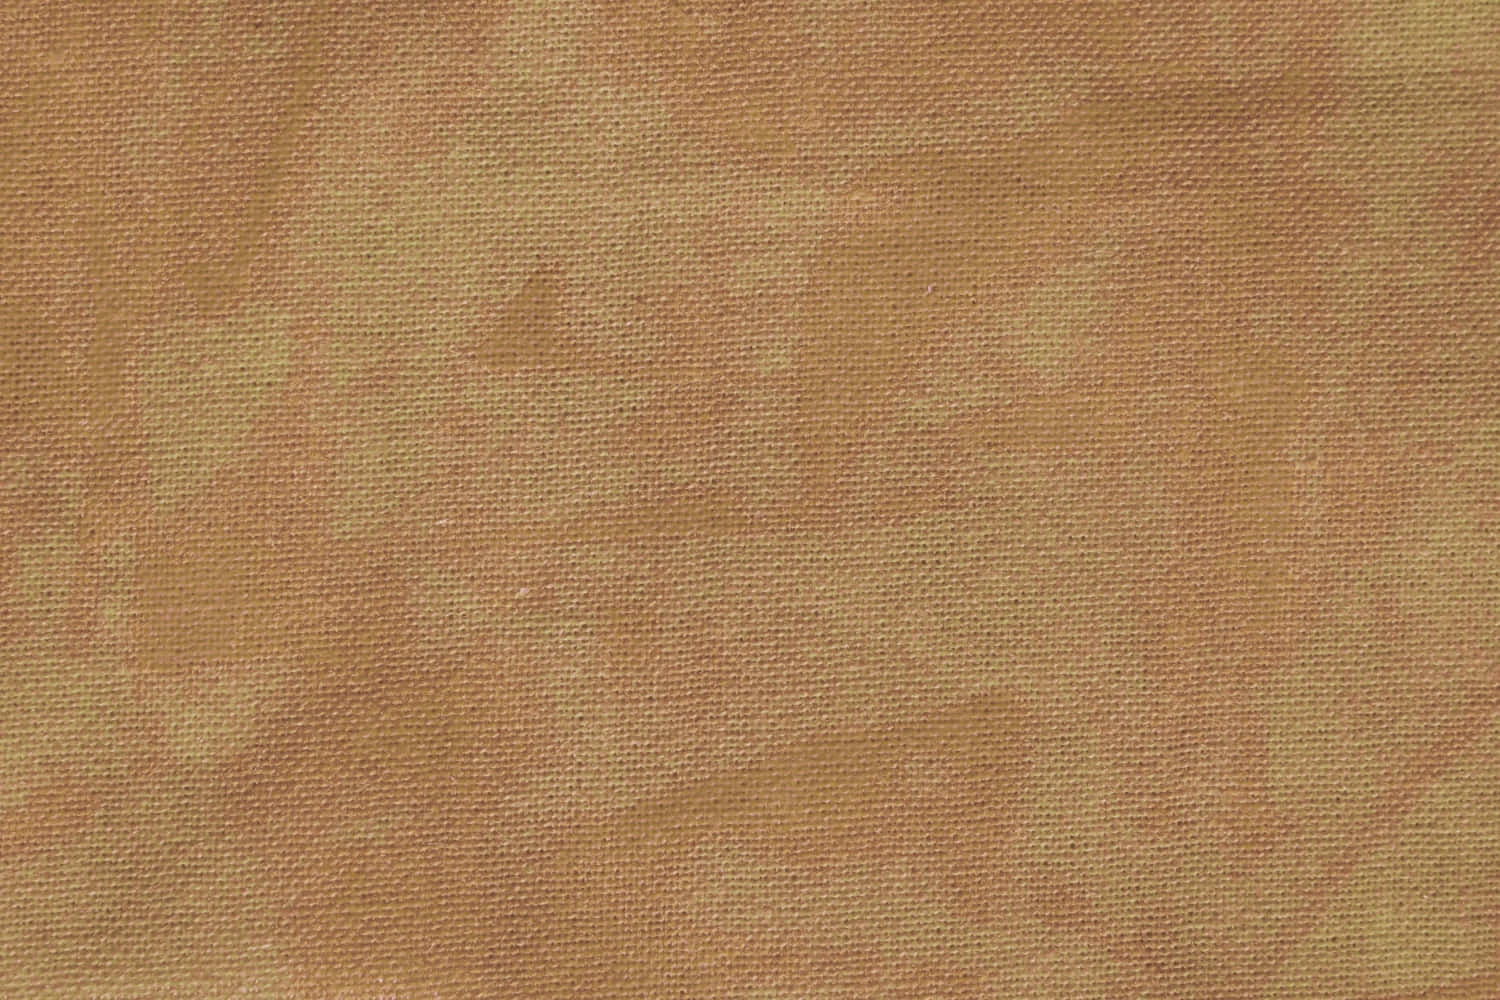 Brown Fabric Texture Pictures